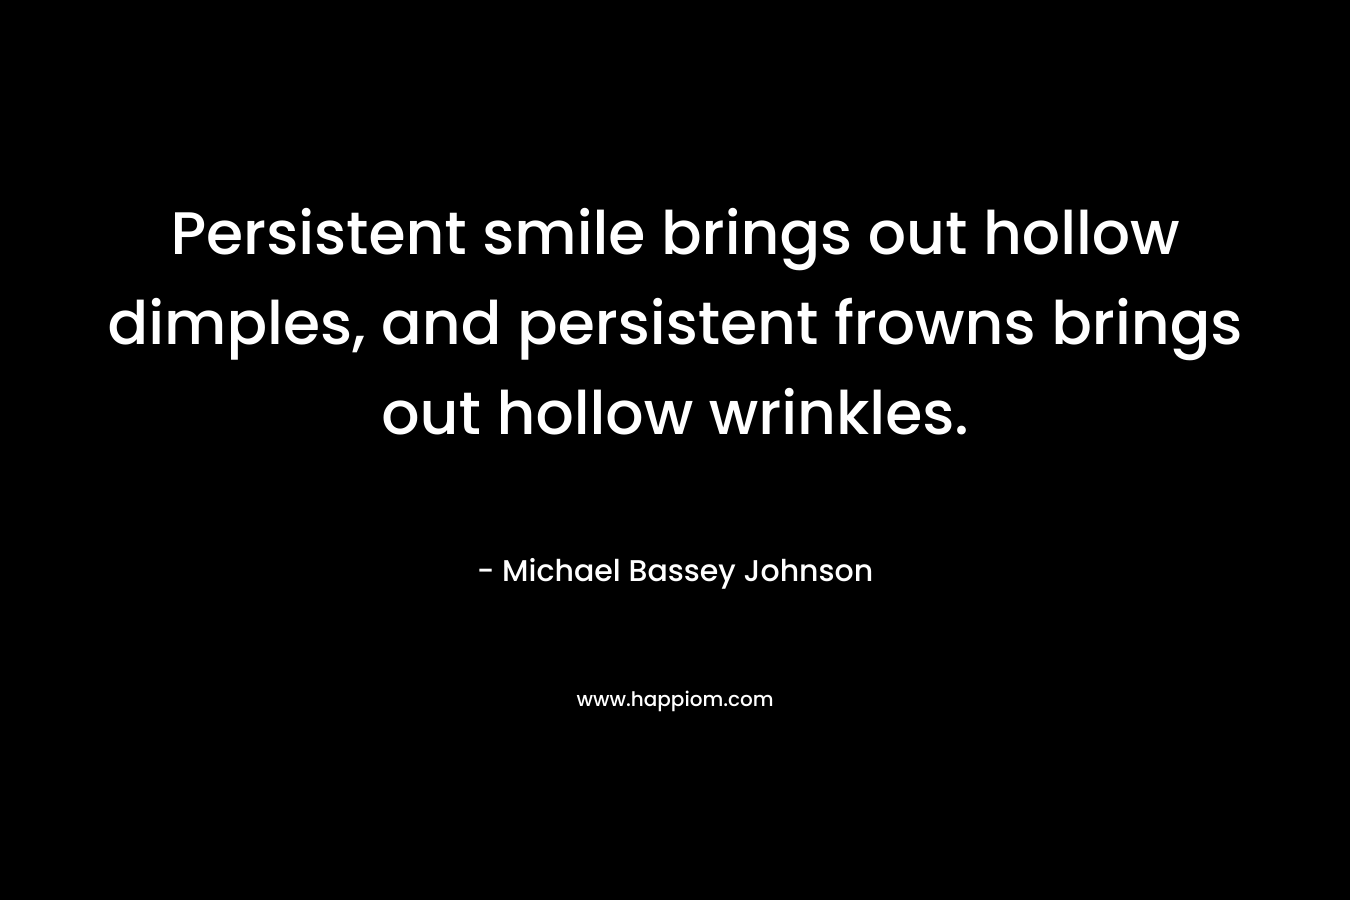 Persistent smile brings out hollow dimples, and persistent frowns brings out hollow wrinkles.